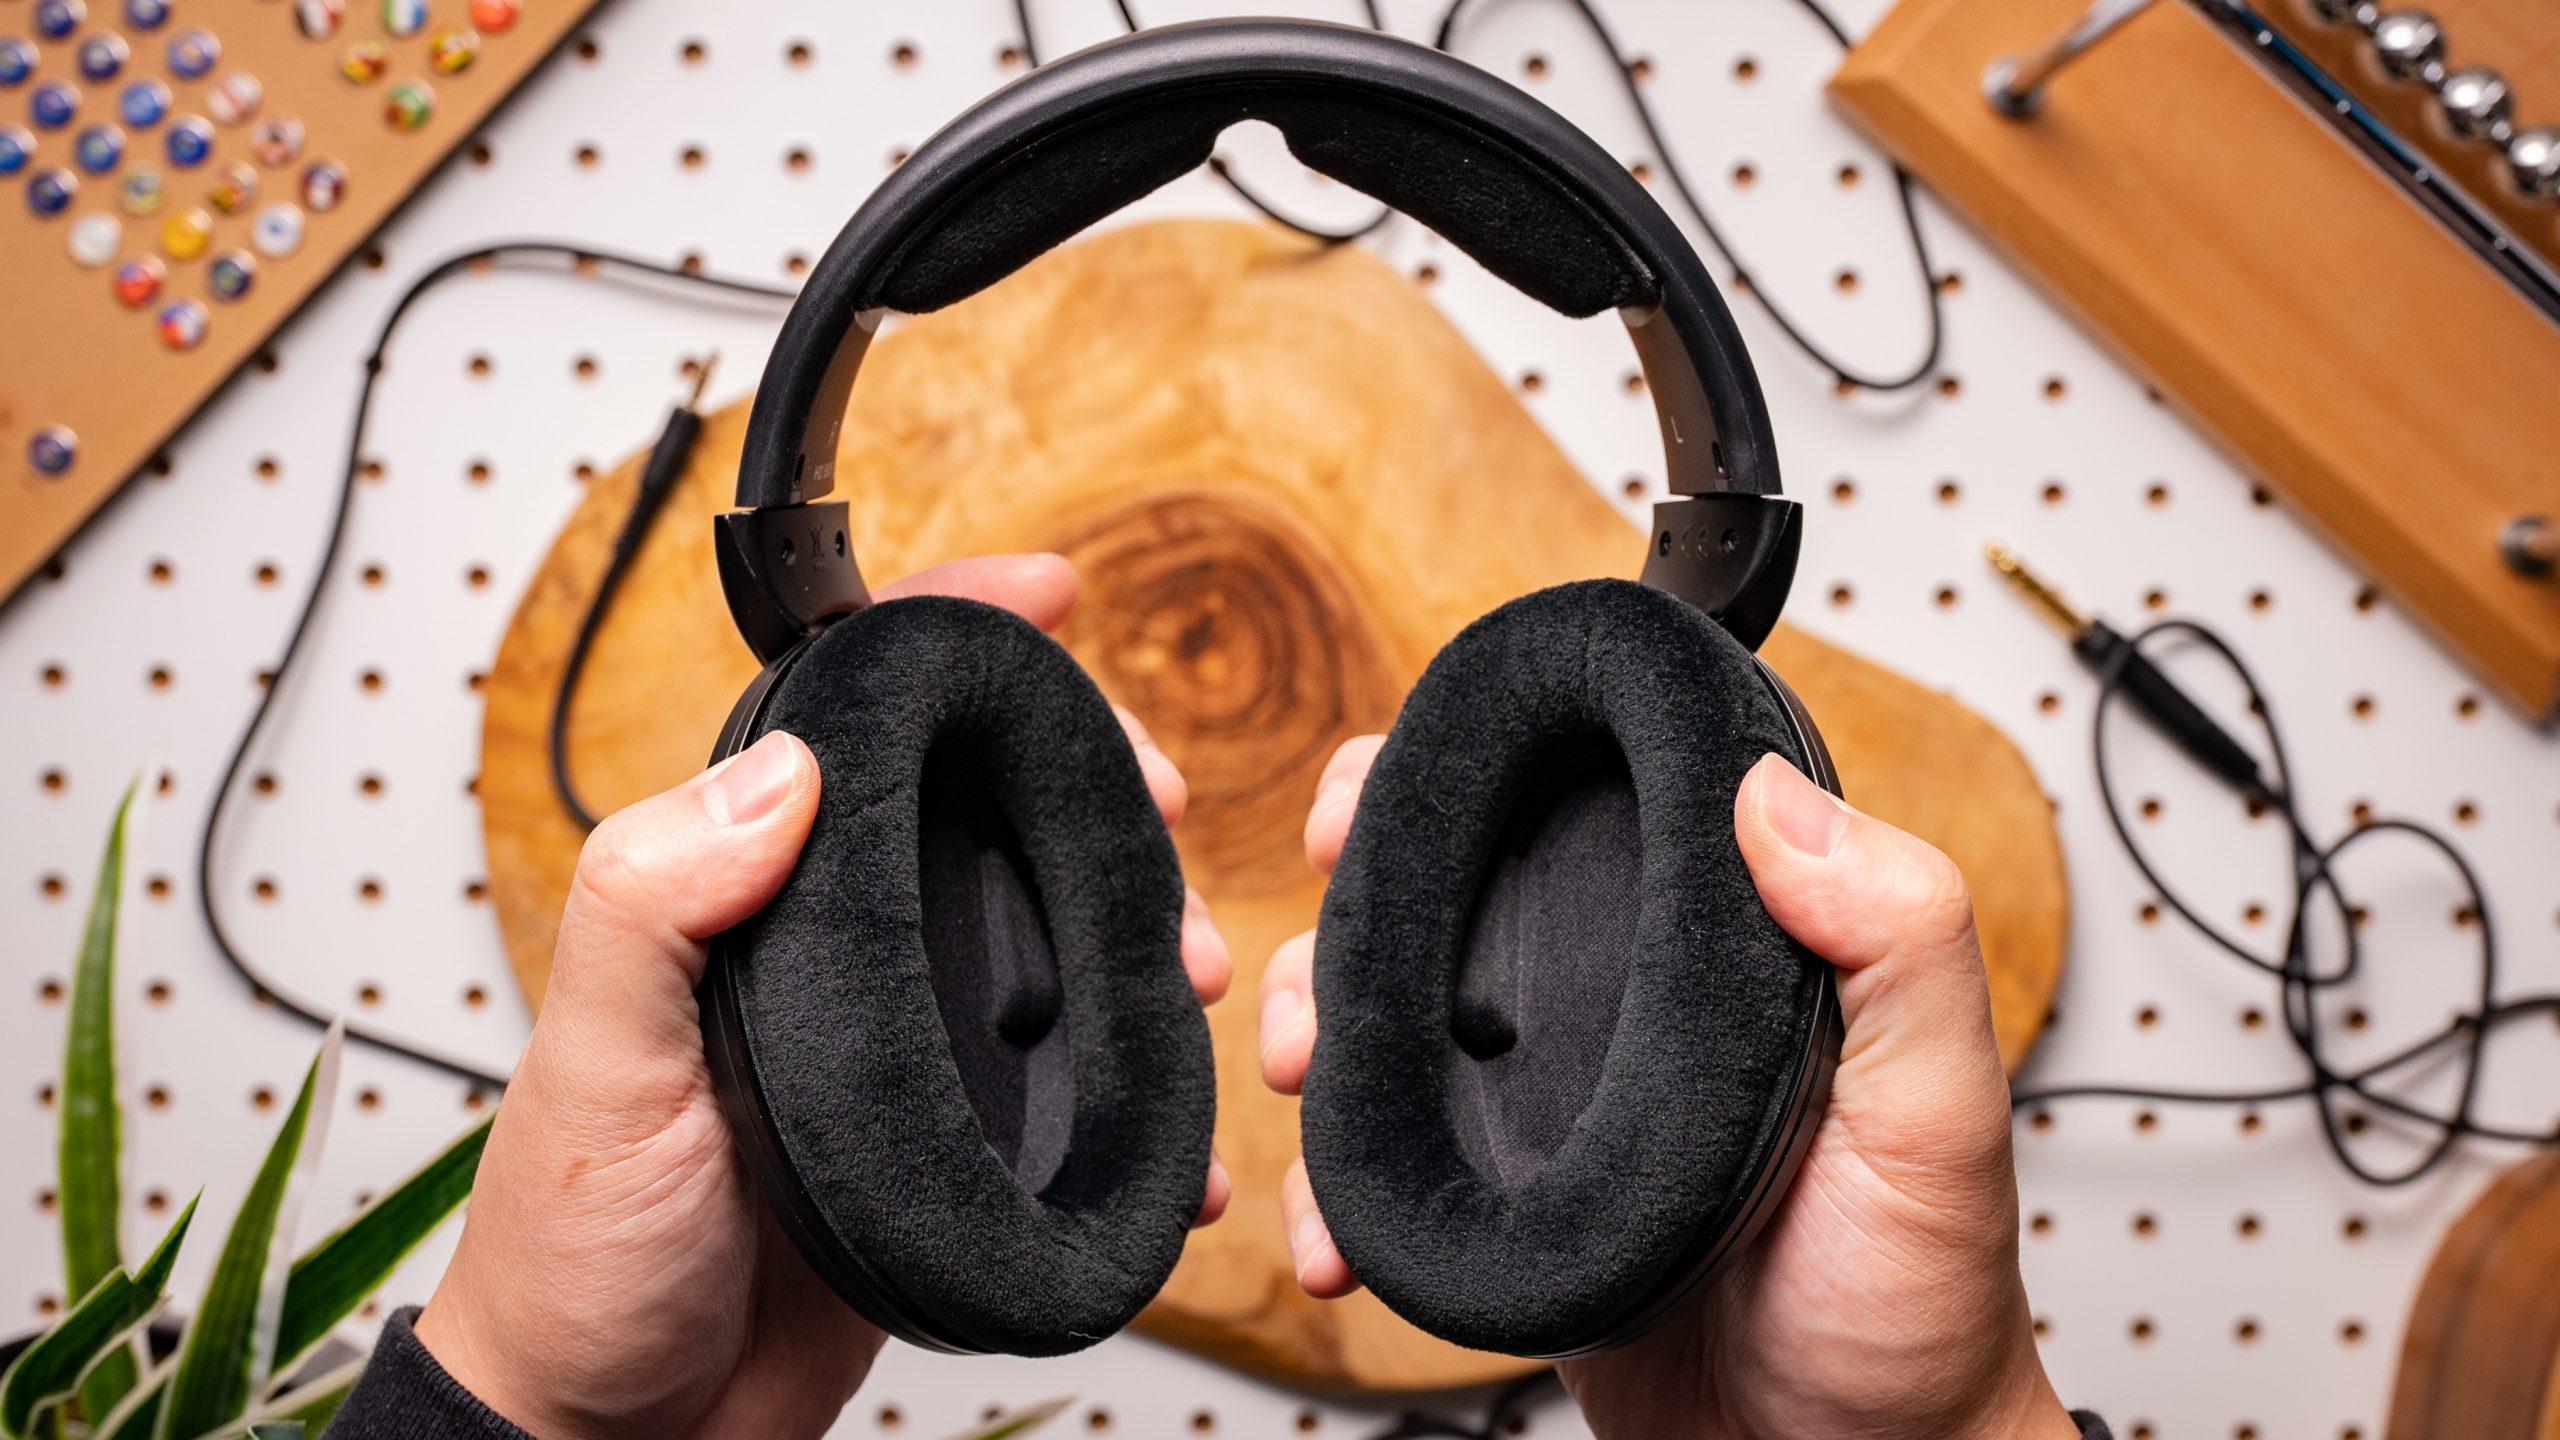 The Sennheiser HD 560S' ear pads are cloth, and the drivers are angled to accommodate your ears.